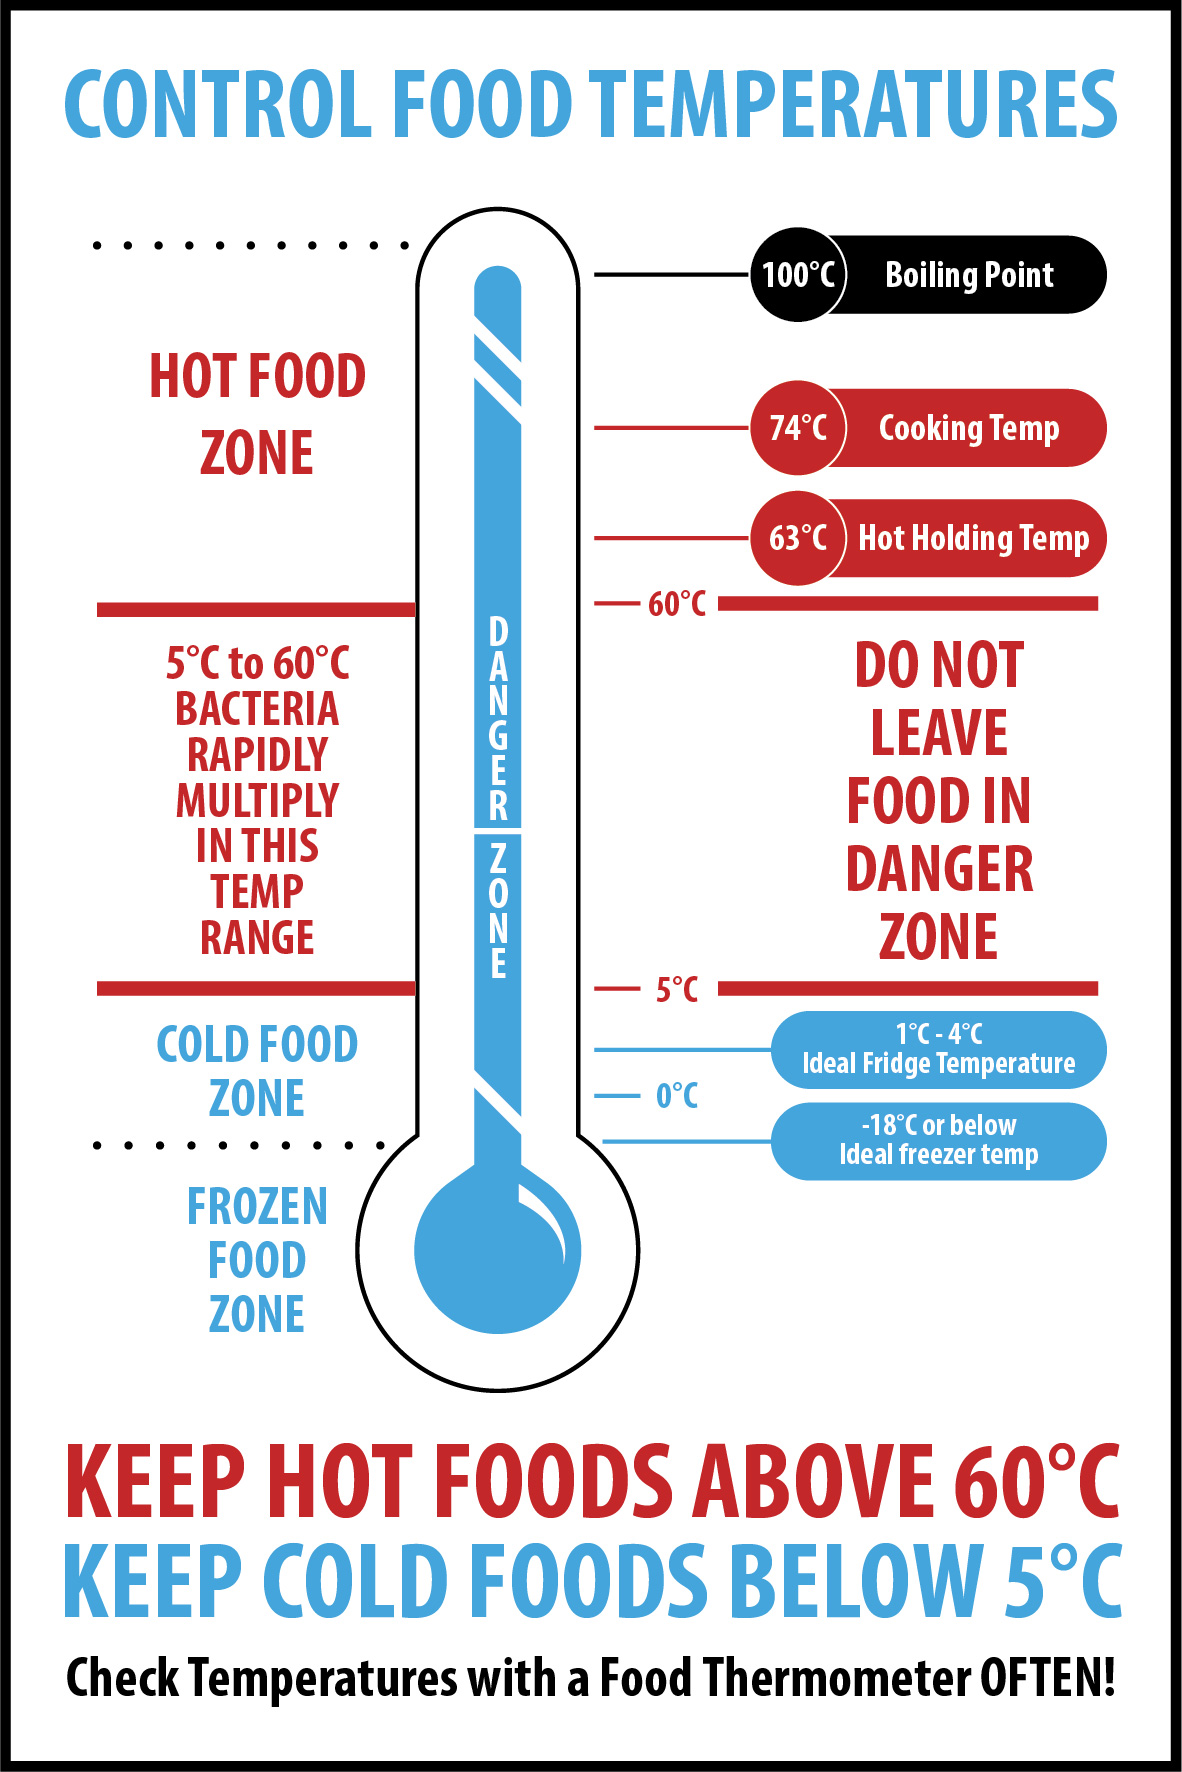 https://www.thehospitalityshop.co.uk/wp-content/uploads/2020/06/Control-Food-Temperatures.jpg